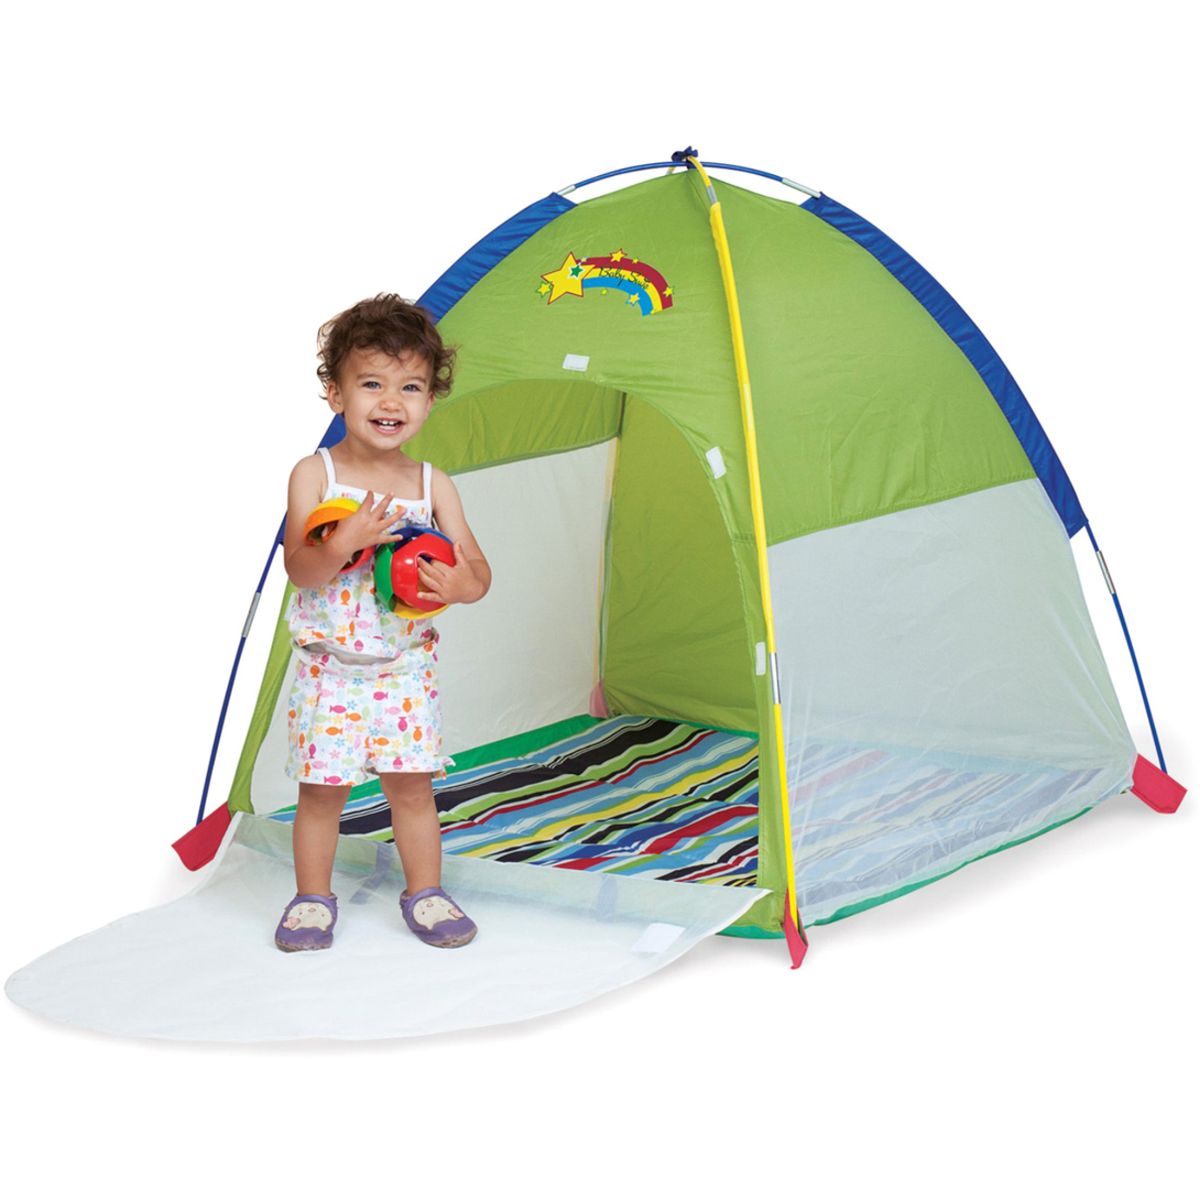 [RDY] [送料無料] Stansport Play Tent [楽天海外通販] | Stansport Play Tent